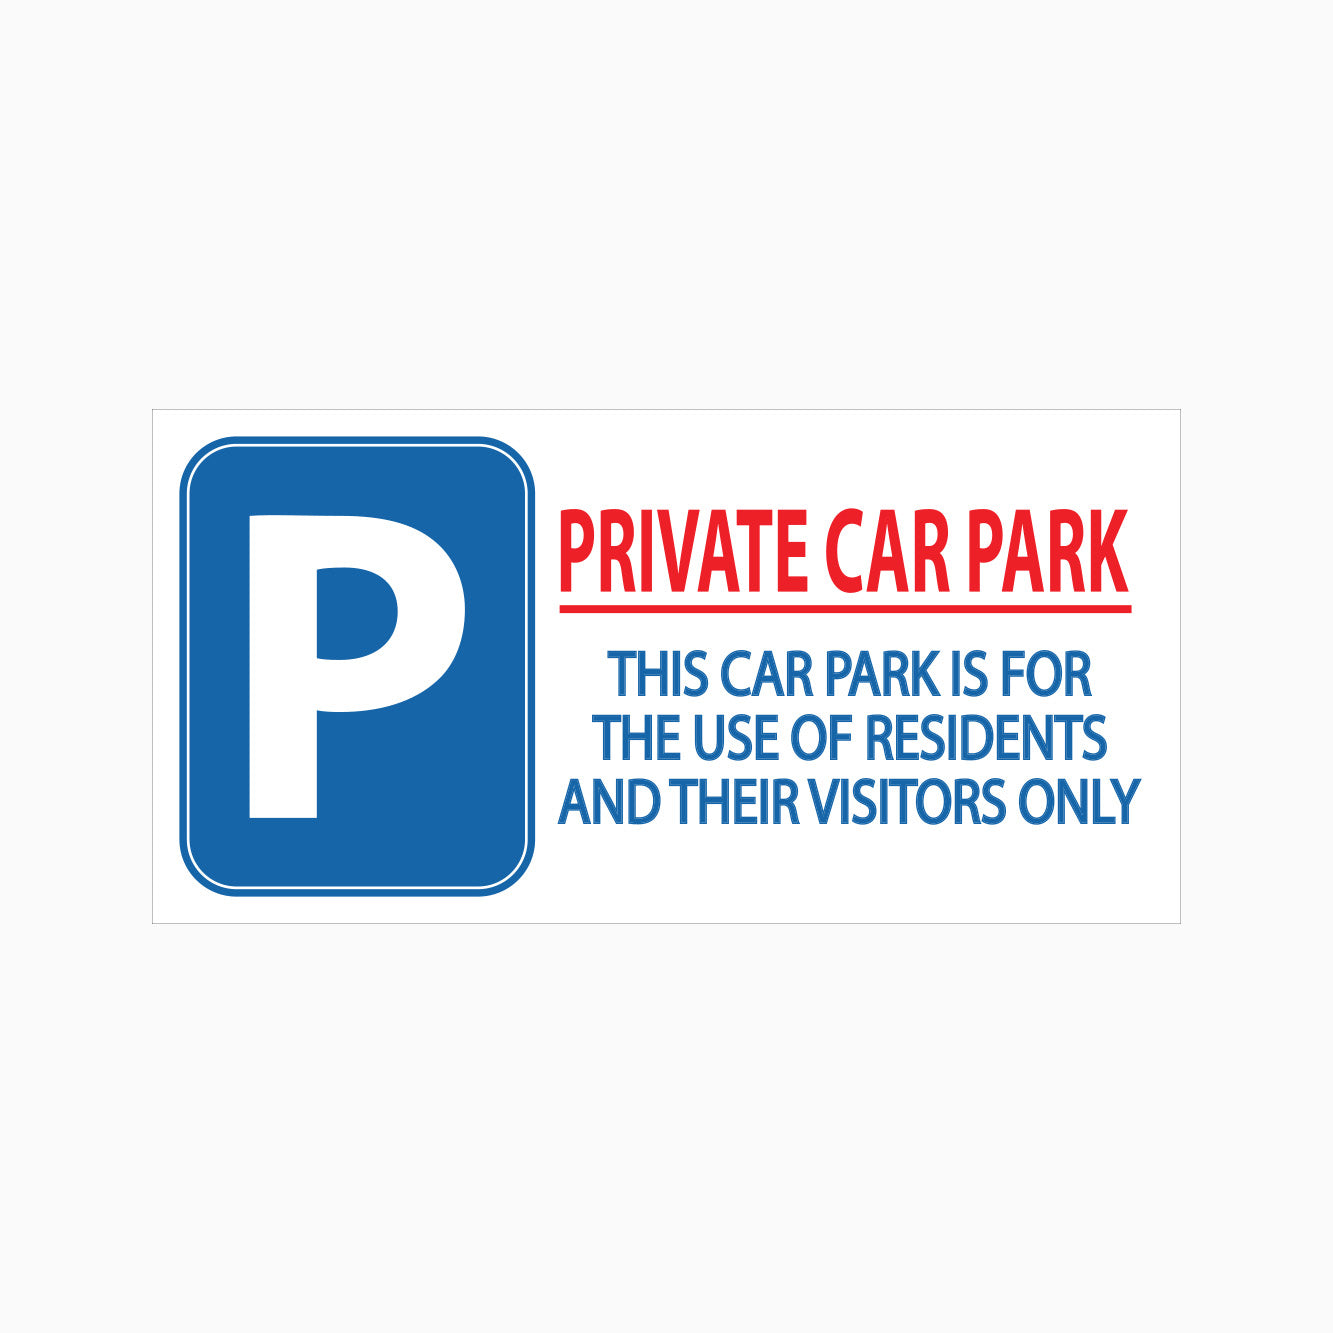 PRIVATE CAR PARK SIGN - THIS CAR PARK IS FOR THE USE OF RESIDENTS AND THEIR VISITORS ONLY SIGN FROM GET SIGNS